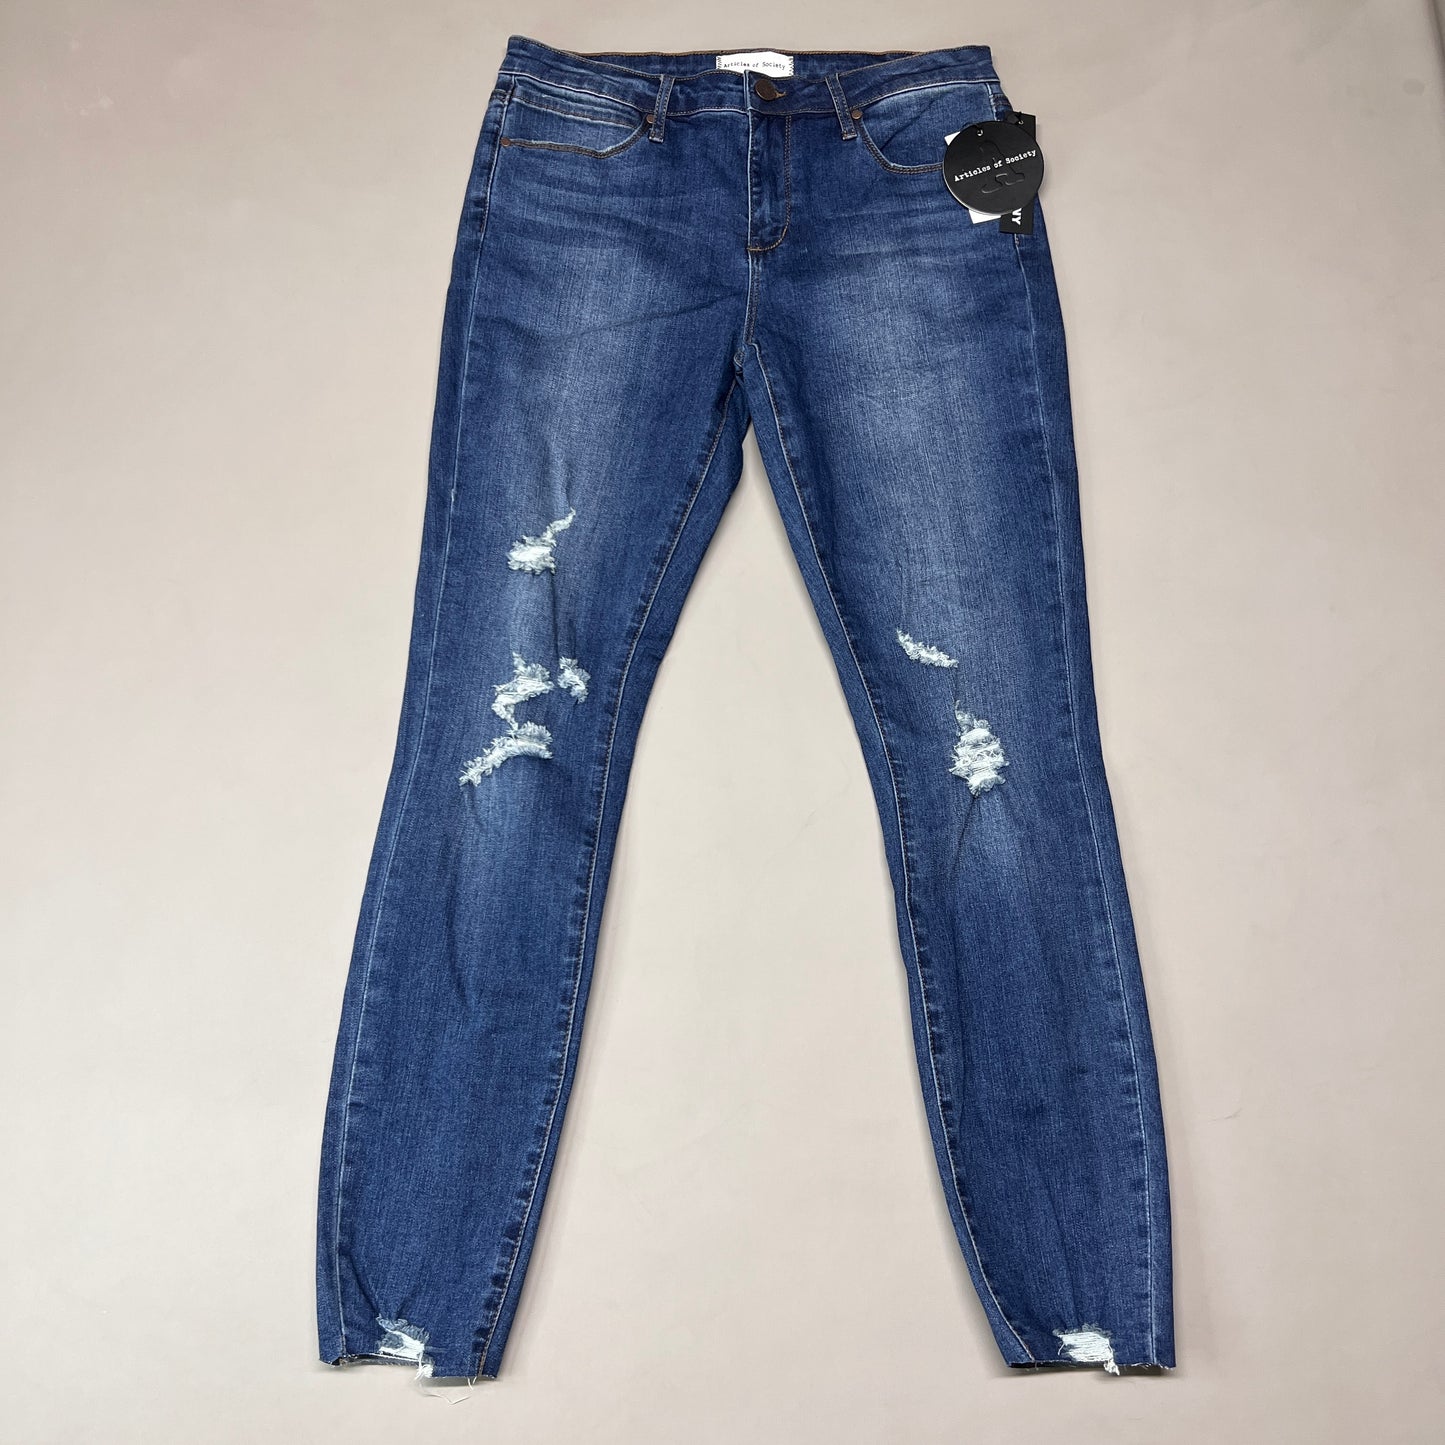 ARTICLES OF SOCIETY Hilo Ripped Denim Jeans Women's Sz 30 Blue 5350PLV-706 (New)